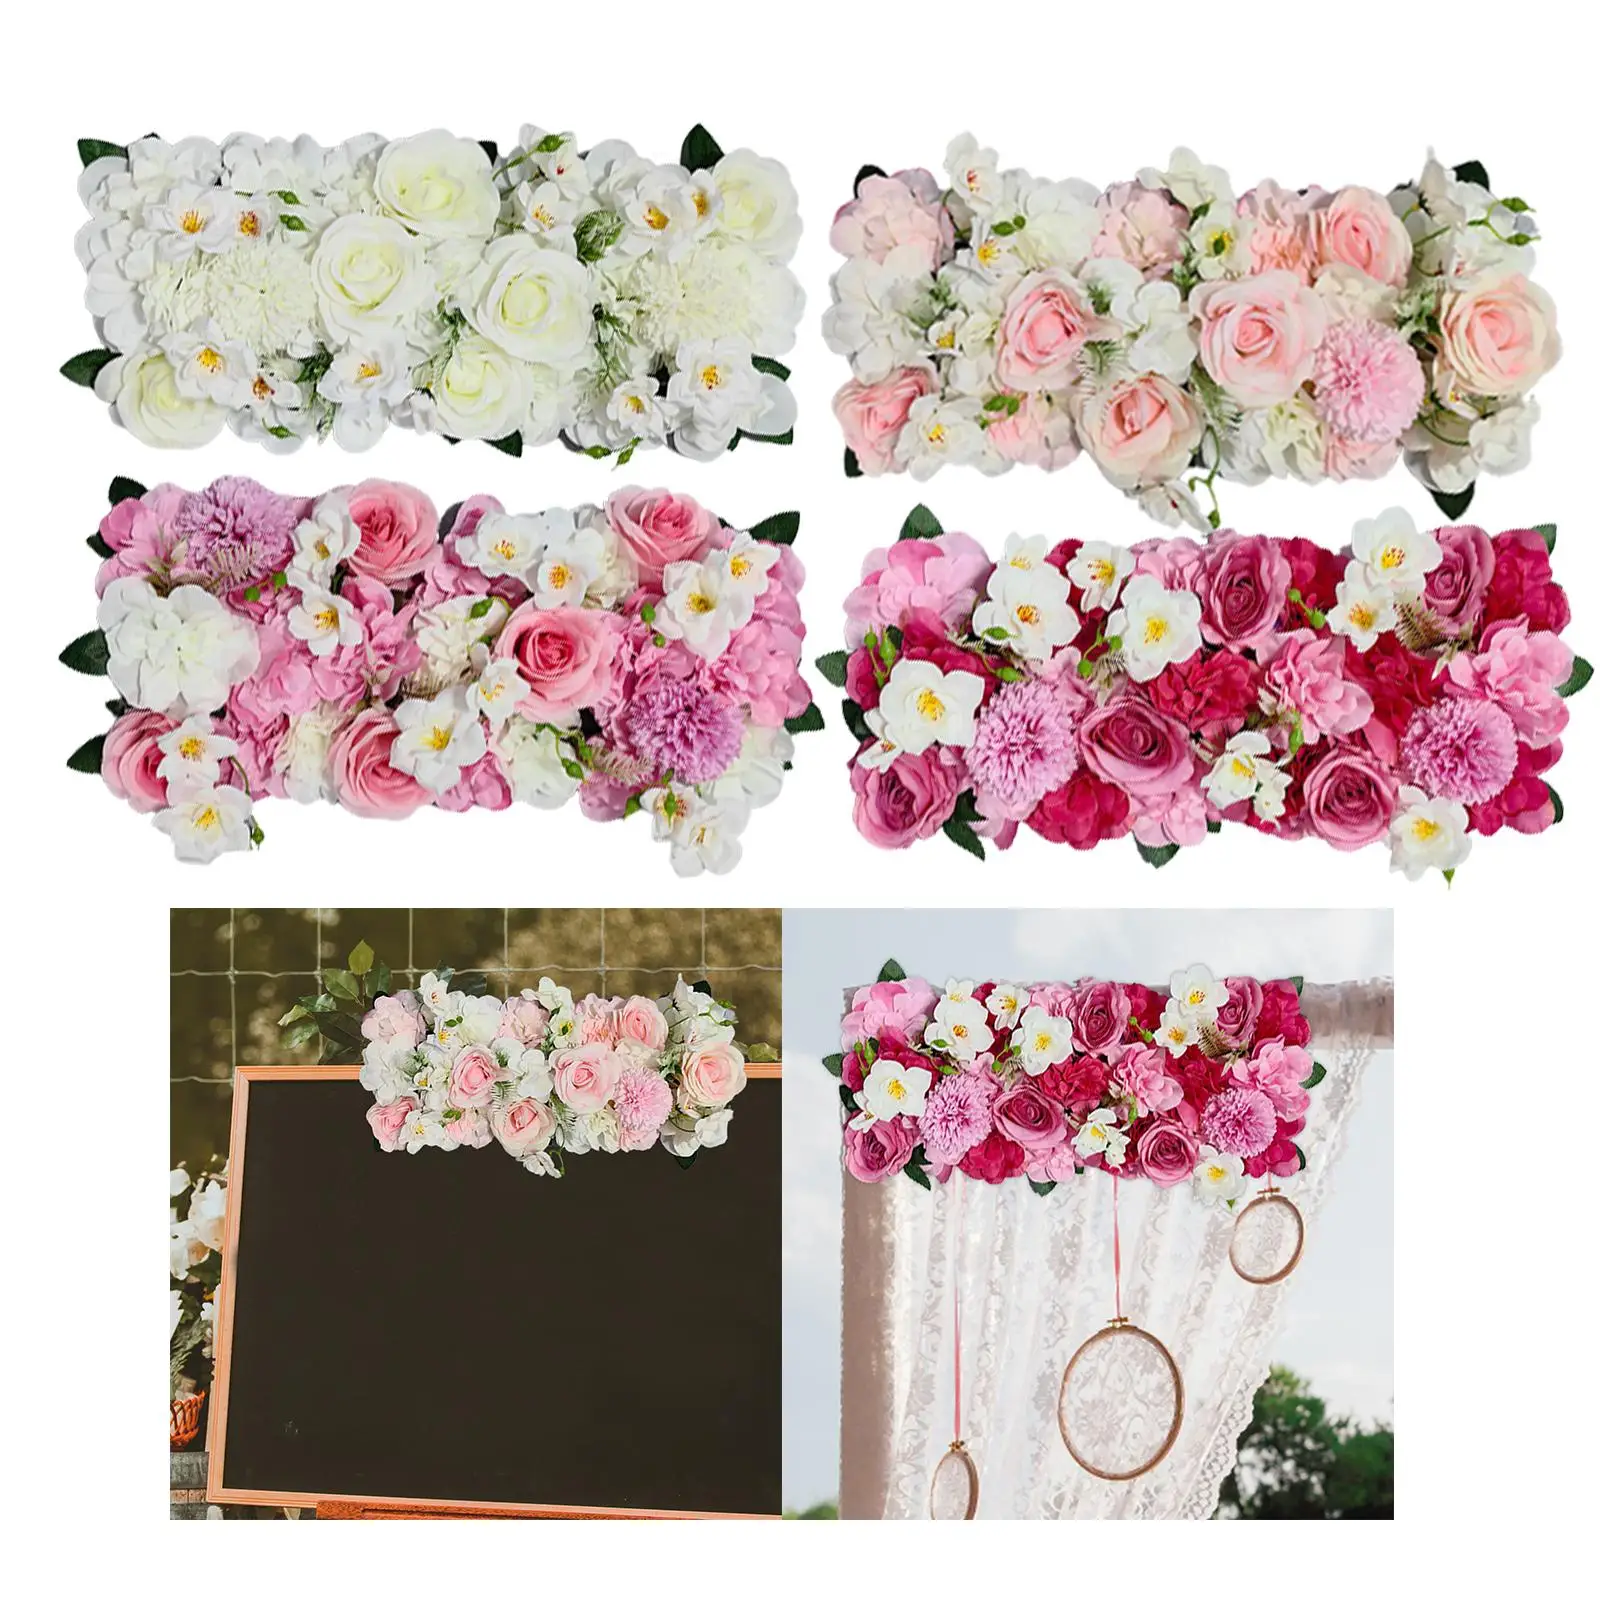 Arched Door Flower Row Decoration Silk Cloth Rose Photo Props Wedding Road Cited